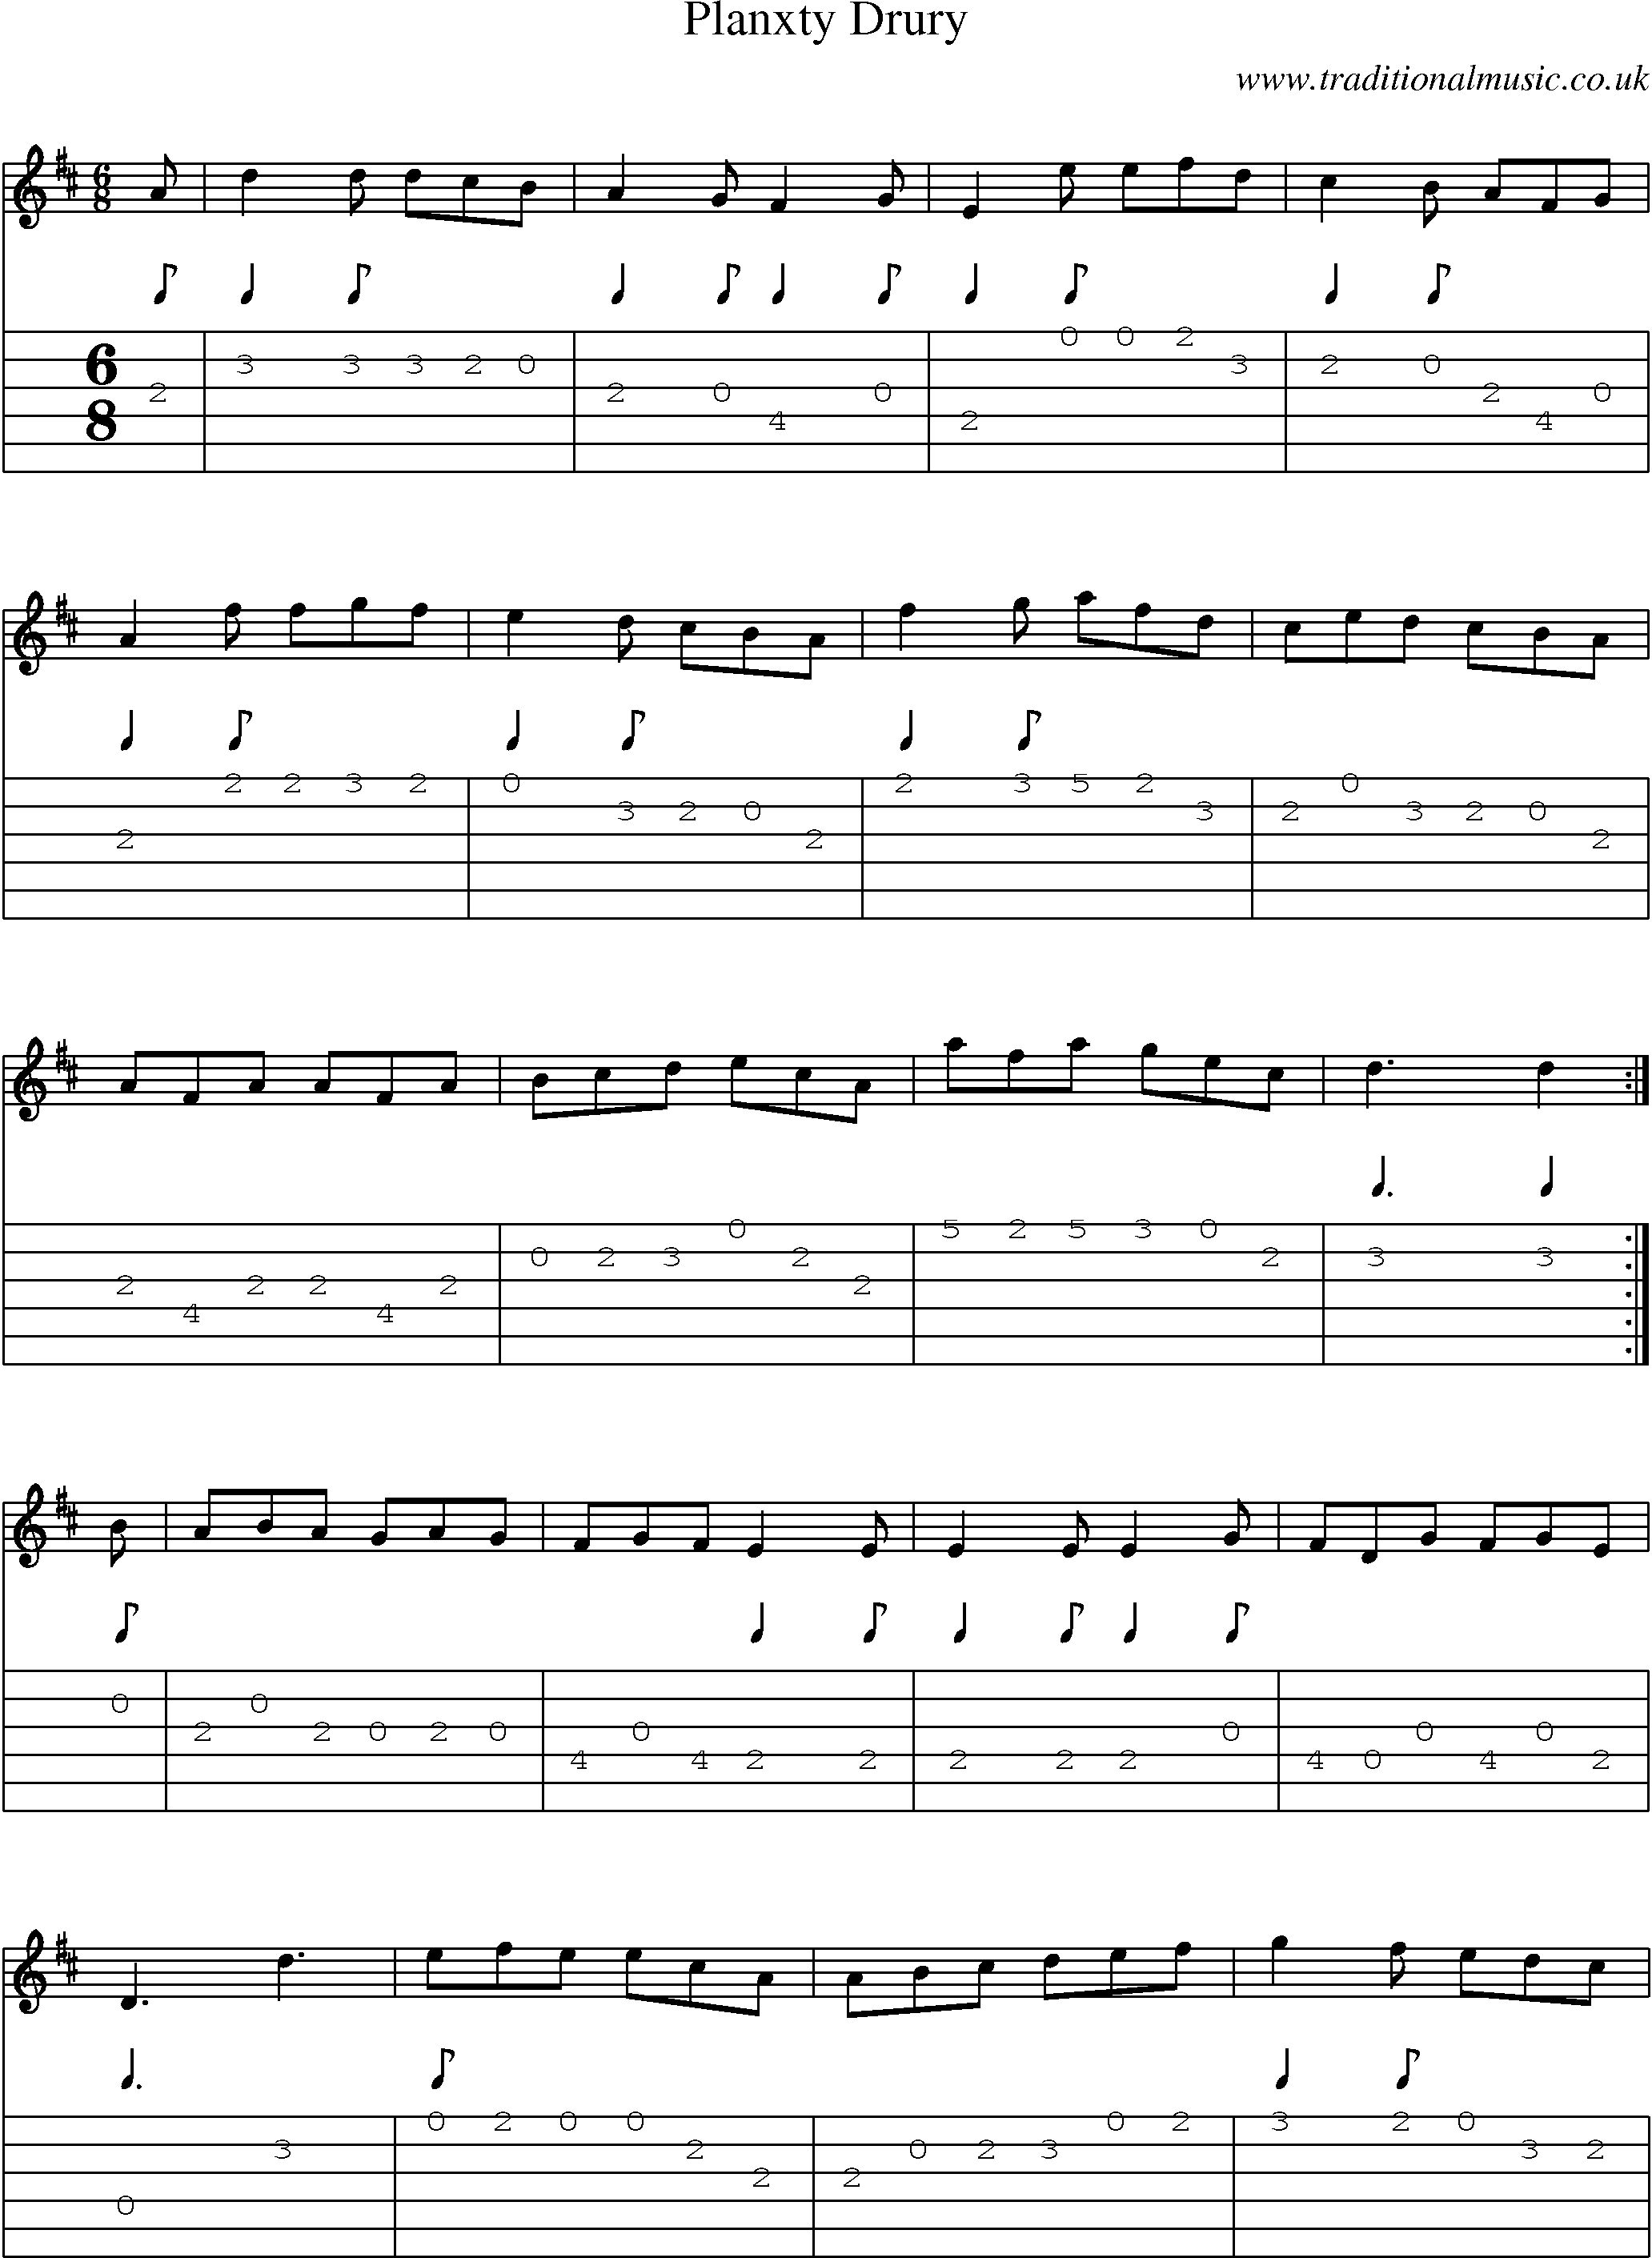 Music Score and Guitar Tabs for Planxty Drury